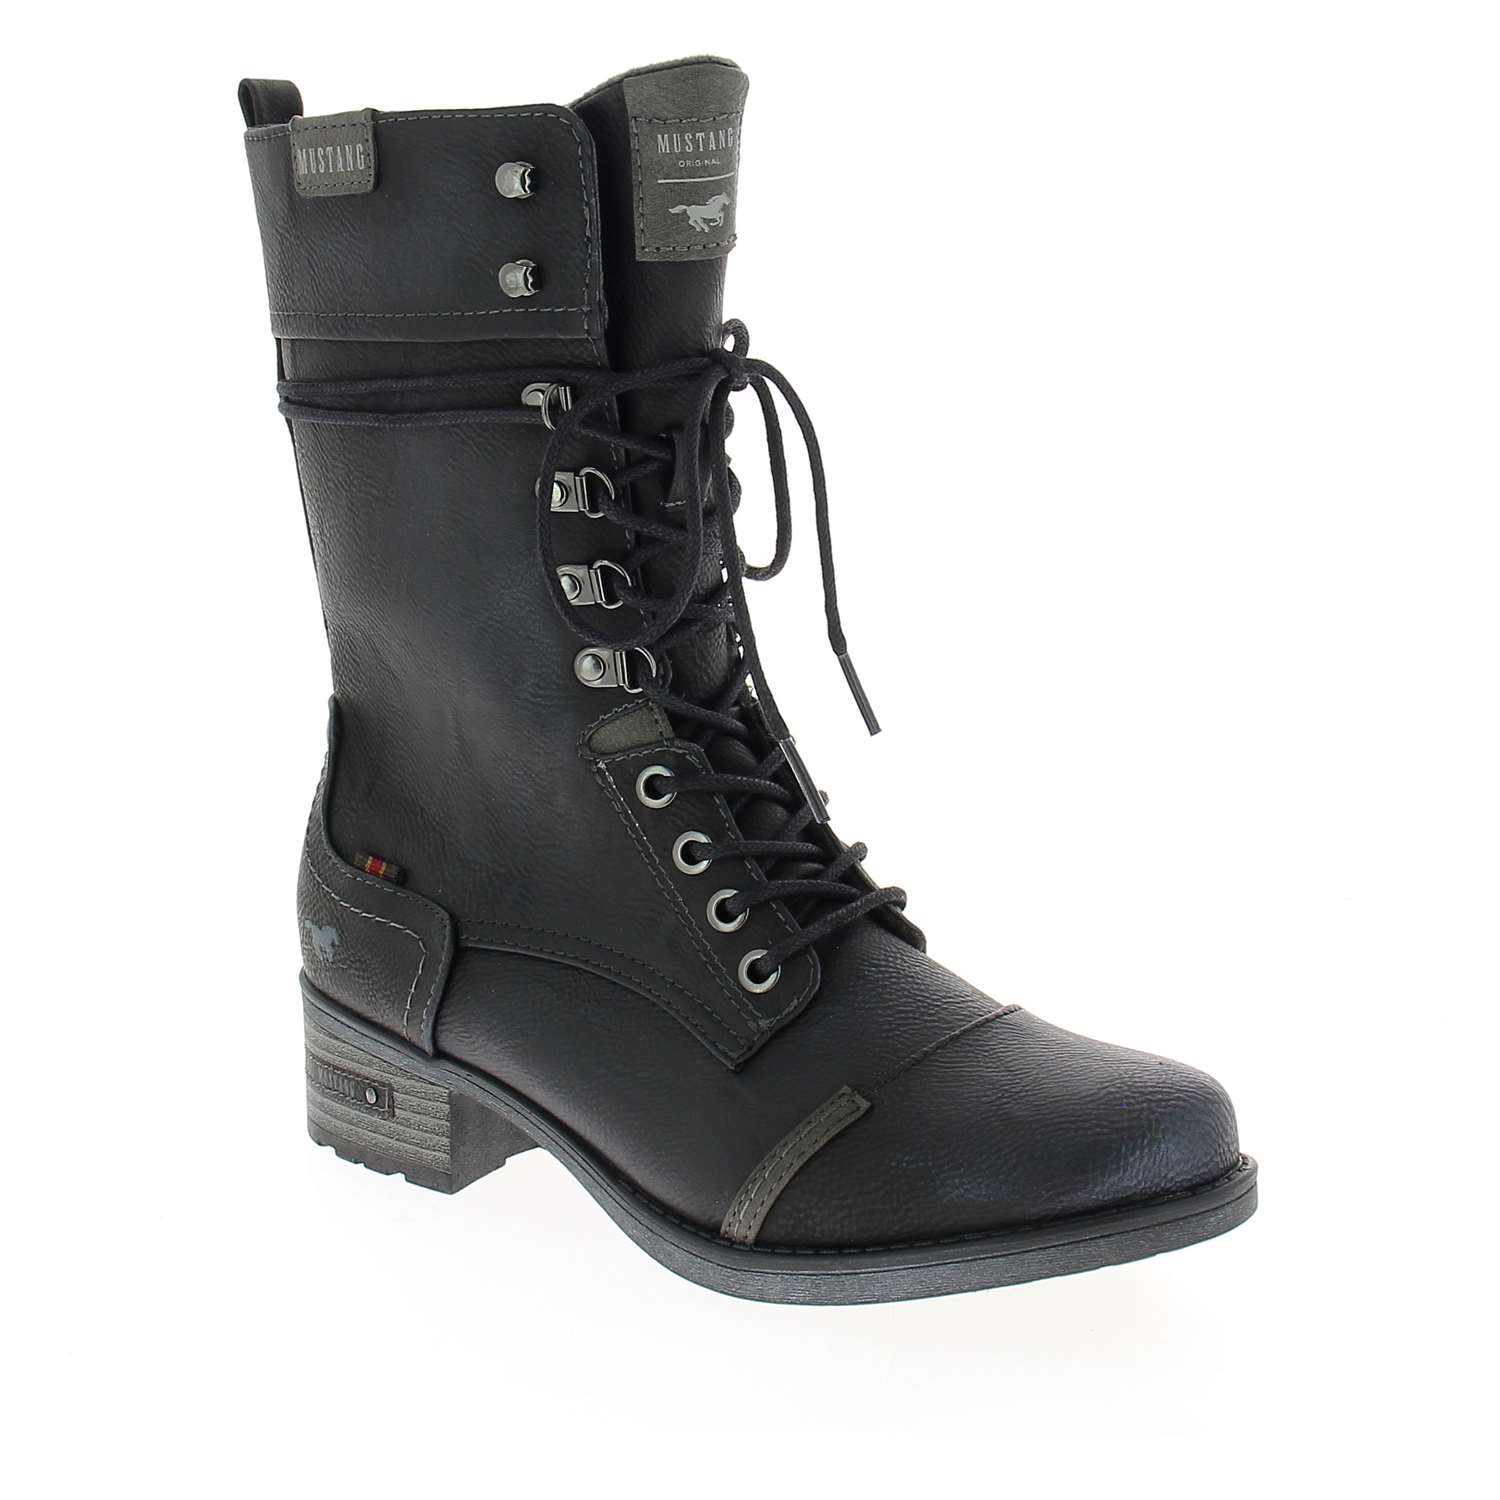 01 - MULYTE - MUSTANG - Boots et bottines - Synthétique